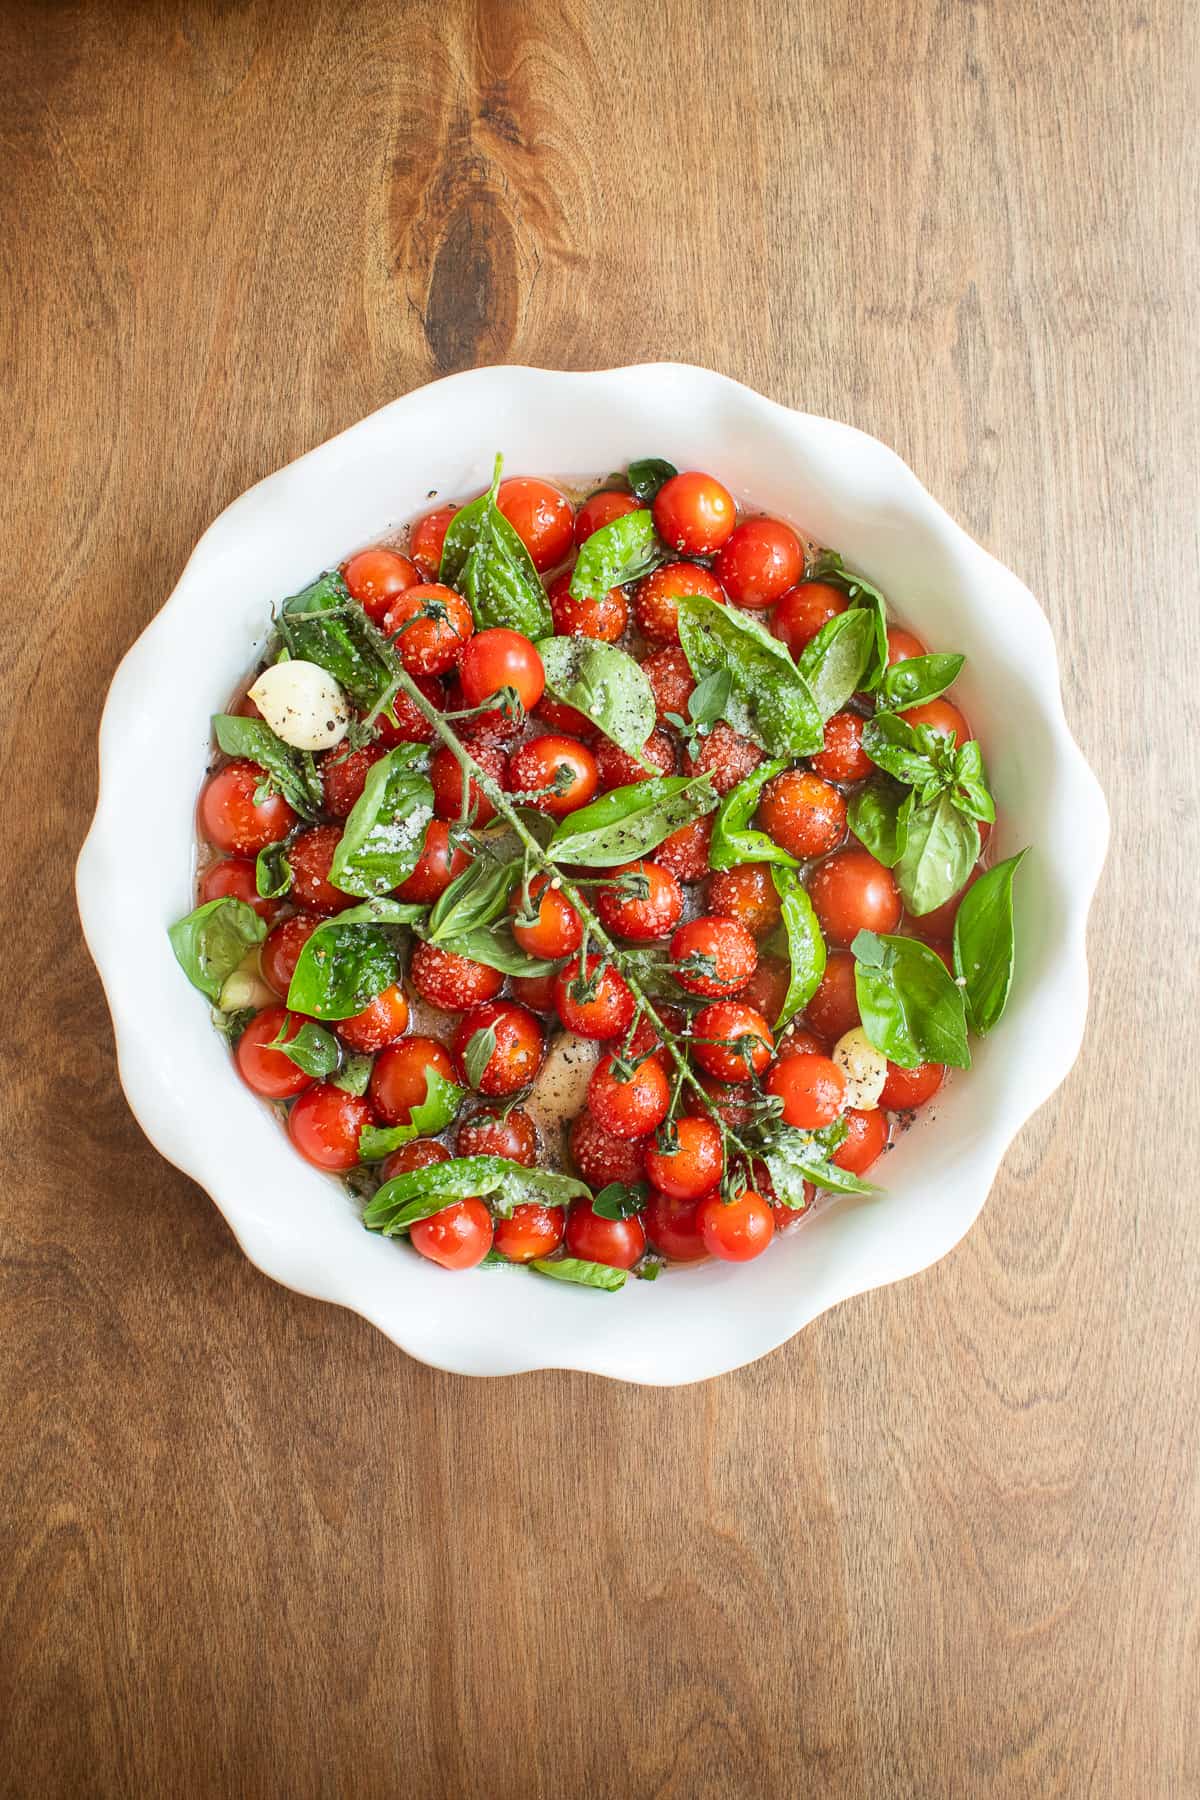 The tomatoes, basil, oregano, garlic, and oil arranged in a deep white pie dish.